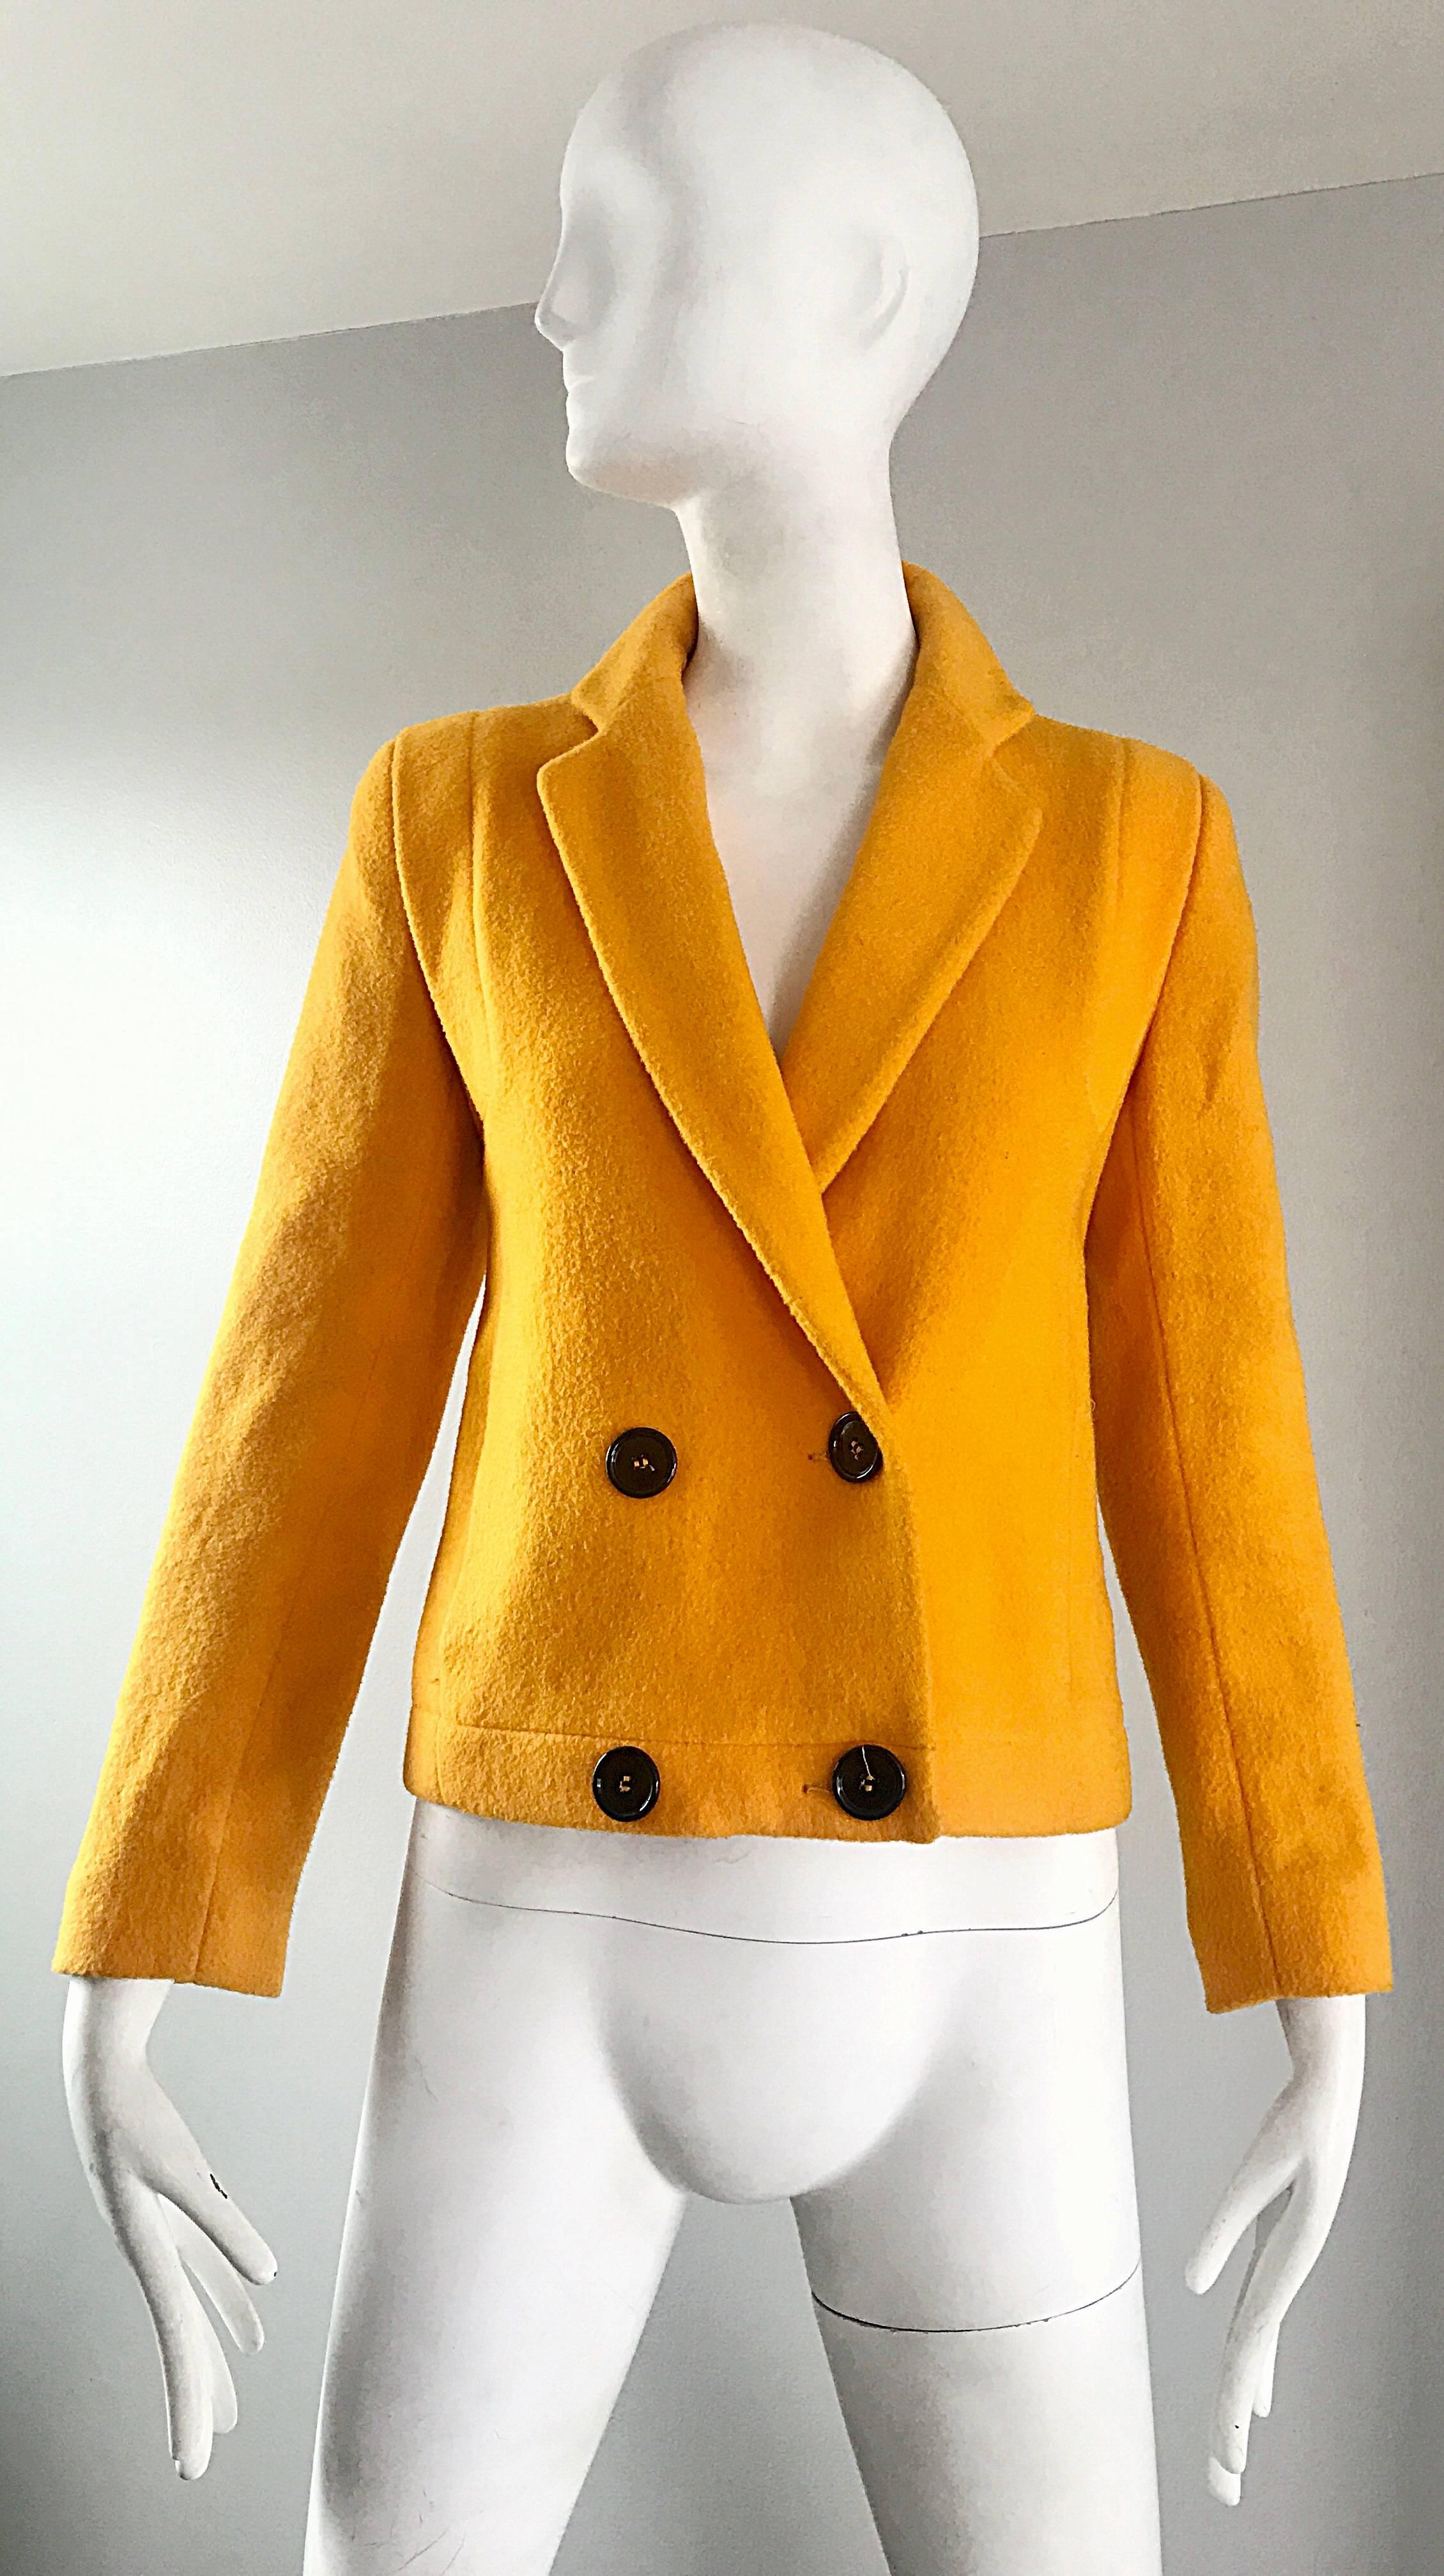 Chic 90s GEOFFREY BEENE for LORD & TAYLOR marigold mustard yellow virgin double breasted wool cropped blazer jacket! Features super soft virgin wool. Full lined, with pockets at each side of the waist. Four black buttons up the front. Great with